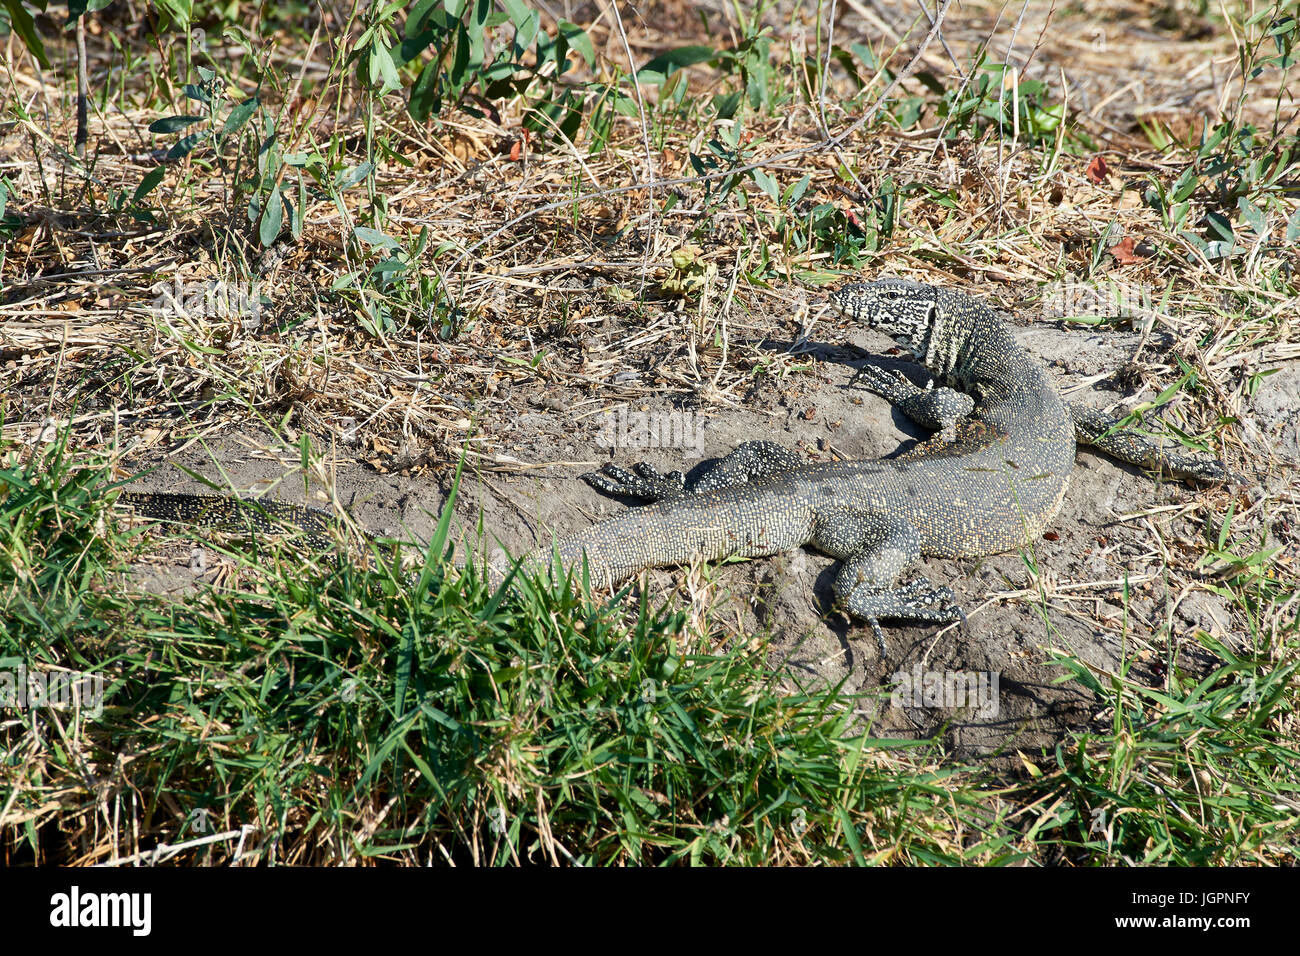 Water Monitor Lizard, basking in the sun on the river bank, Sabi Sands game reserver, South Africa Stock Photo